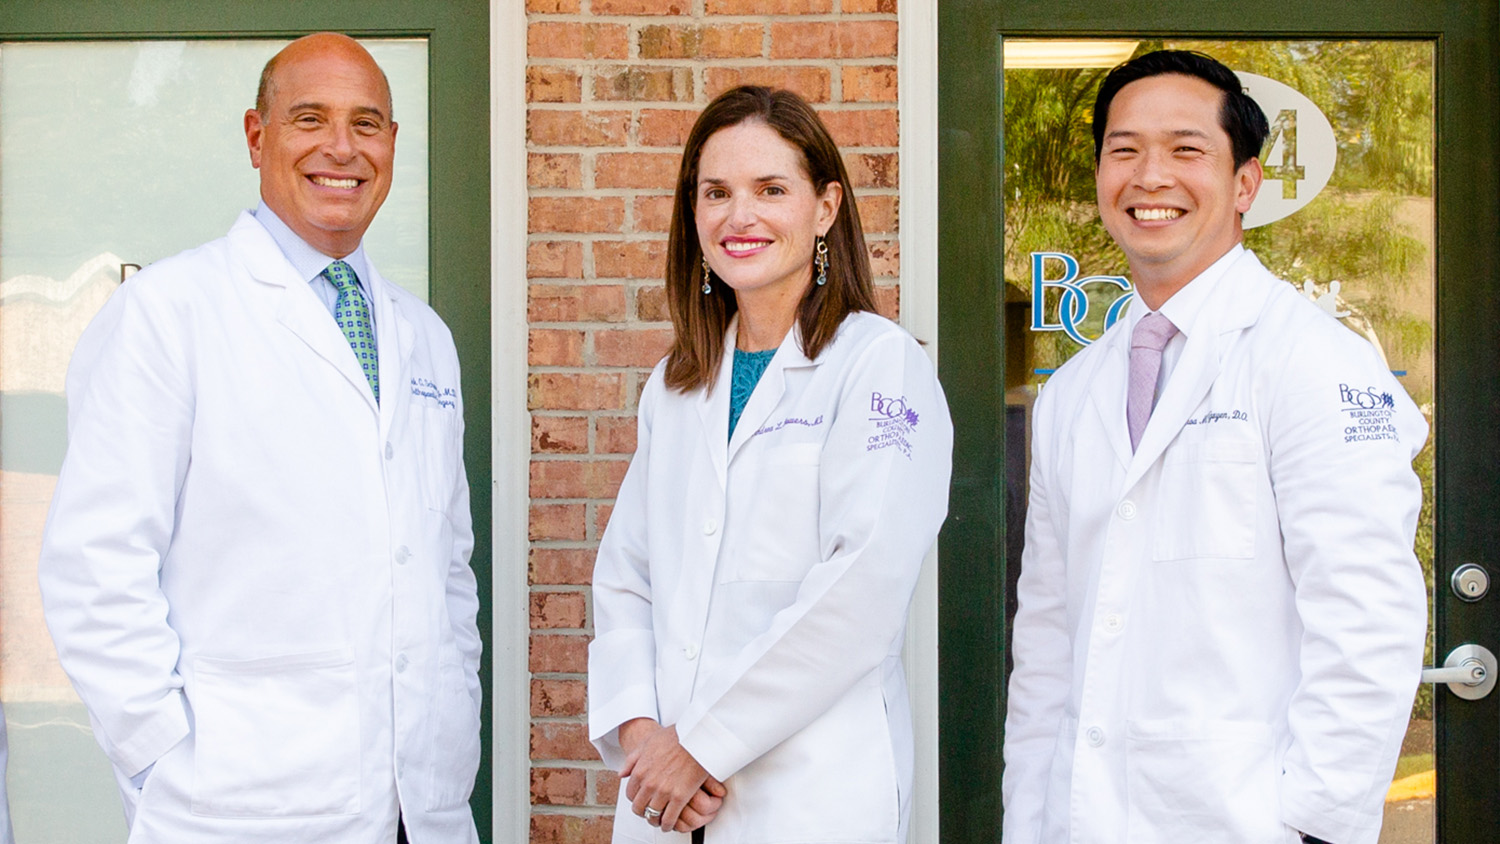 Dr. Nguyen, Dr. Schwartz, and Dr. Bowers posing with smiles